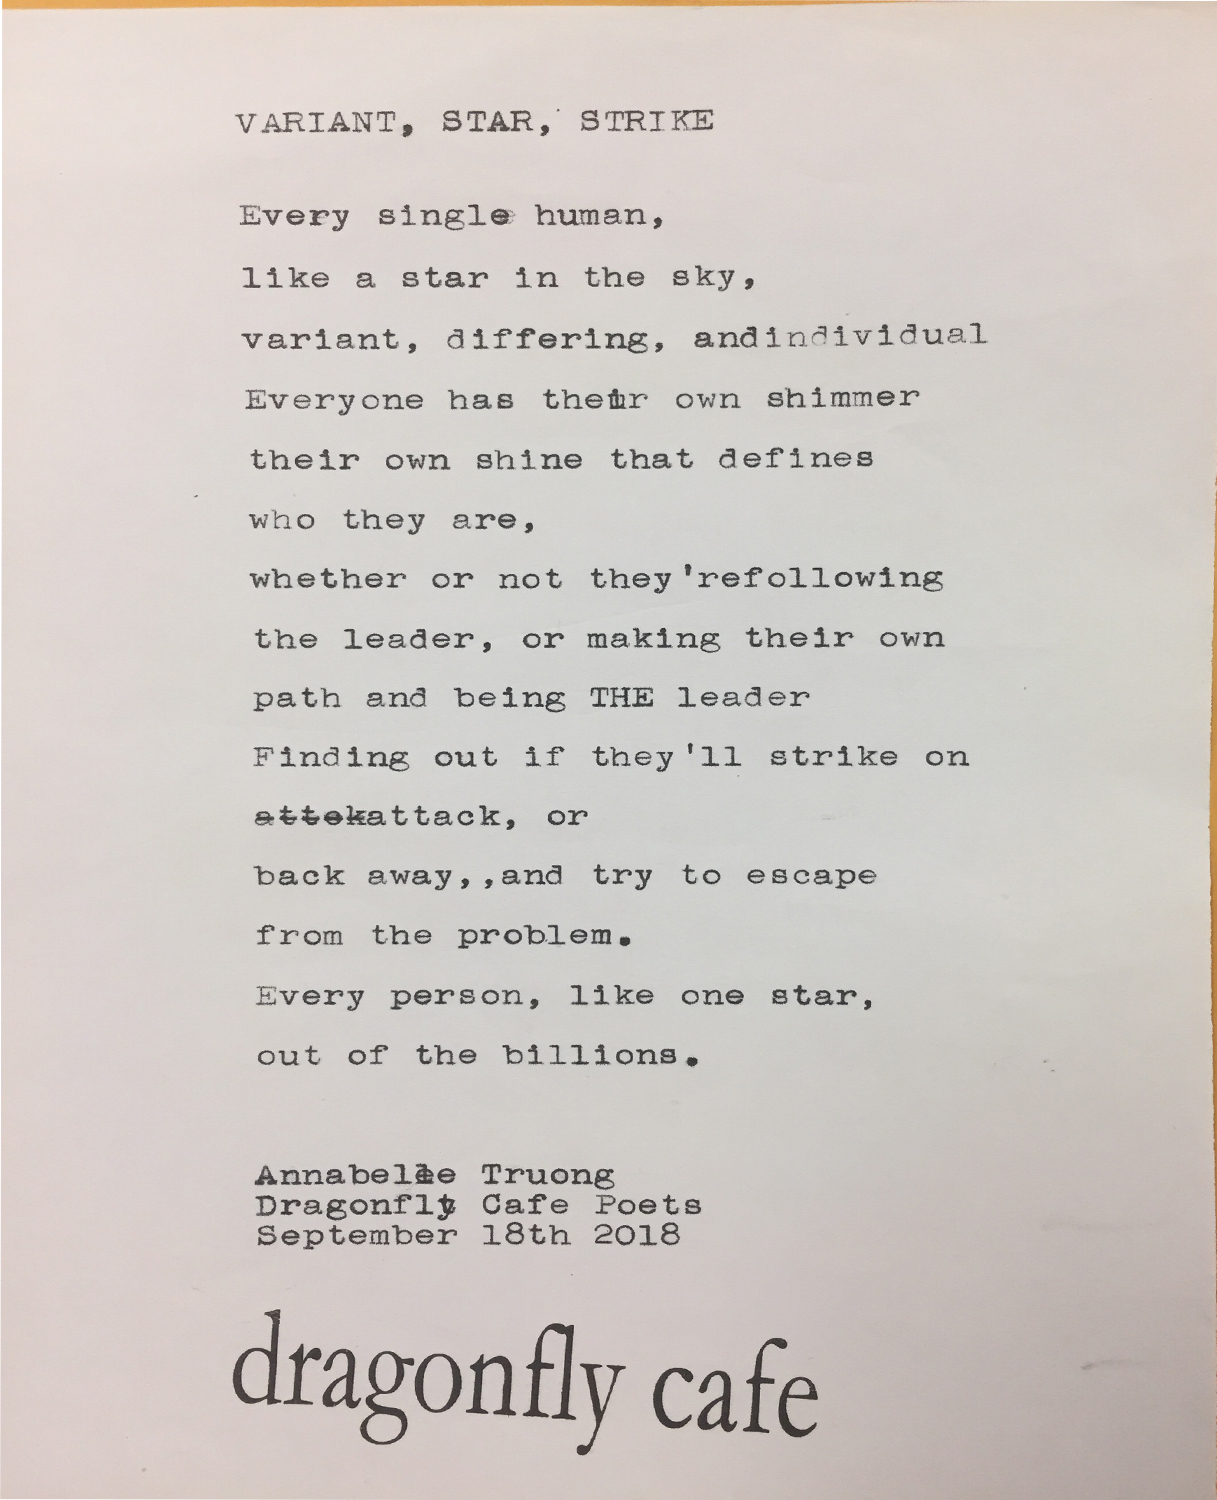 Anabelle Truong made this poem at an event in Sept. 2018.